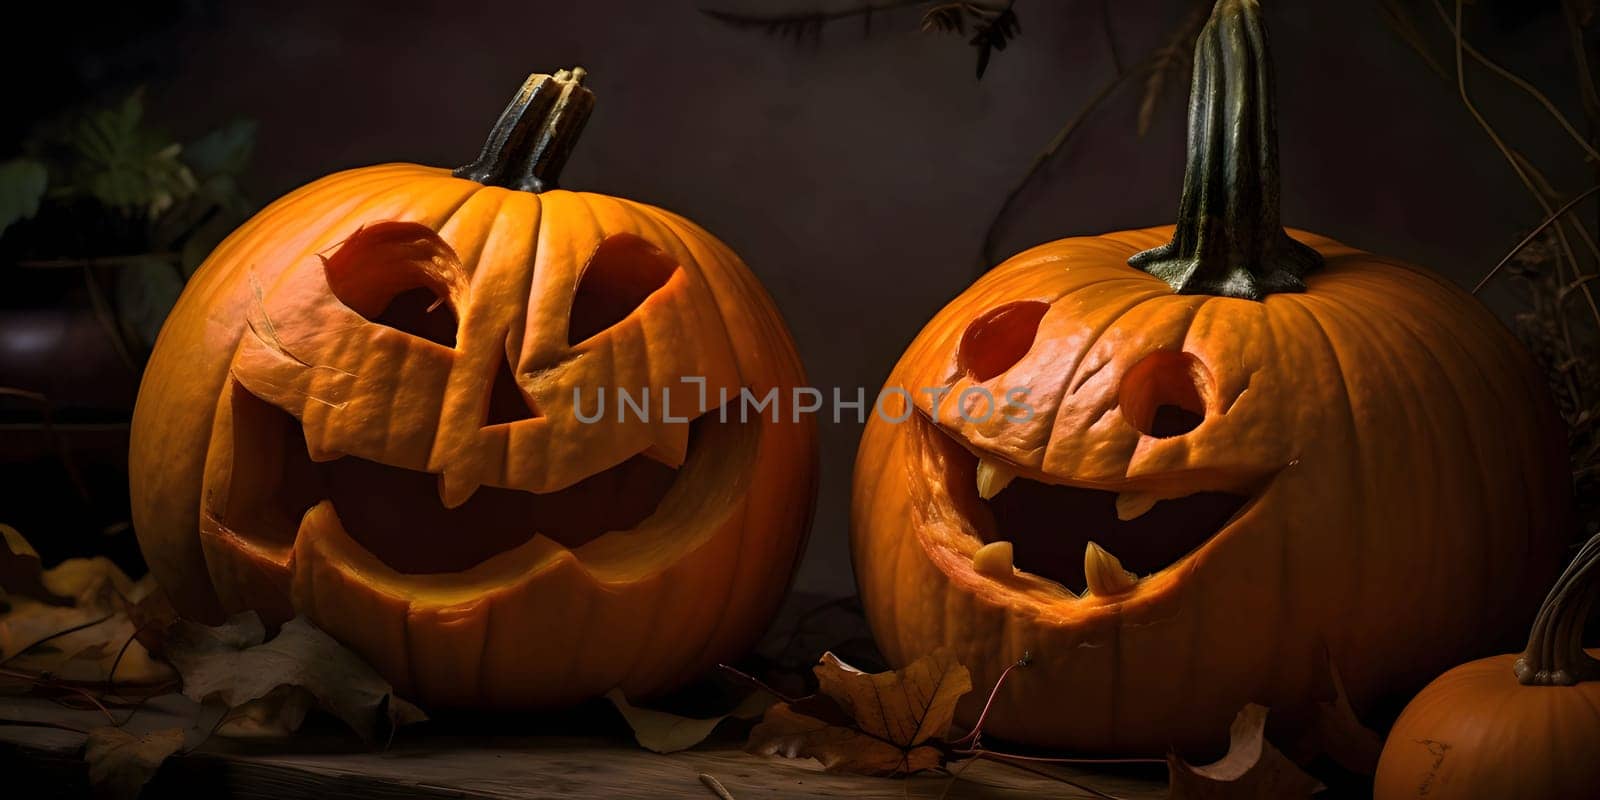 Two dark pumpkins, leaves all around, dark background, a Halloween image. by ThemesS